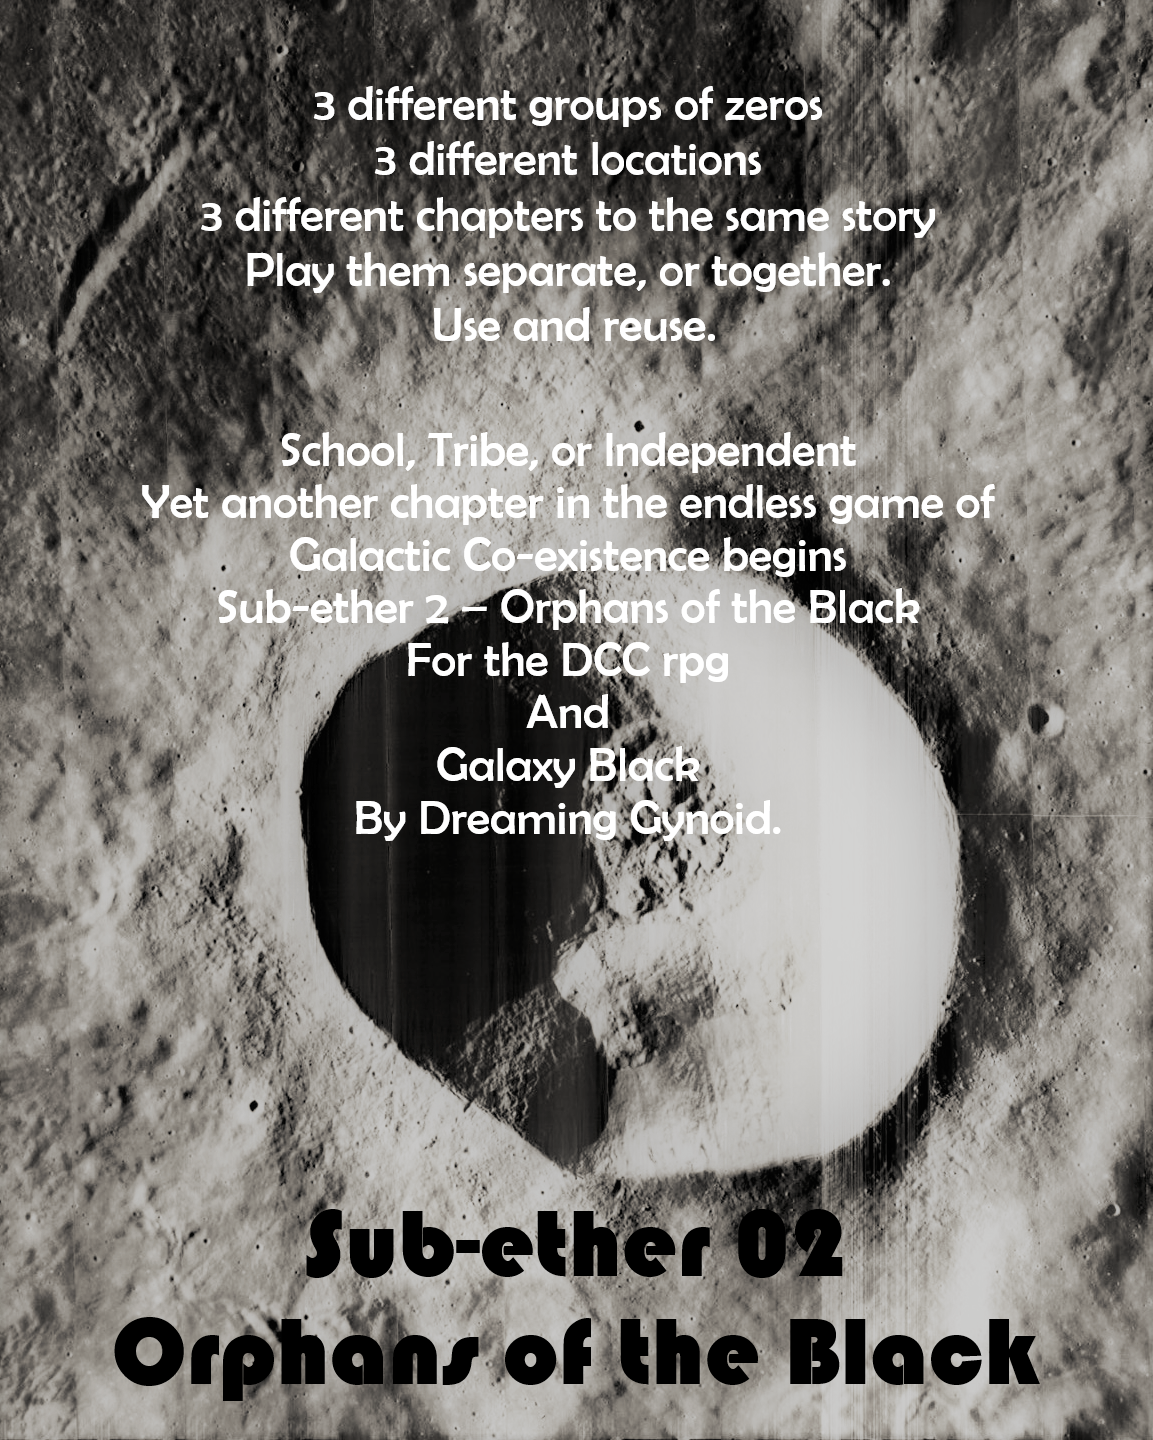 Sub-ether 2 Orphans of the Black